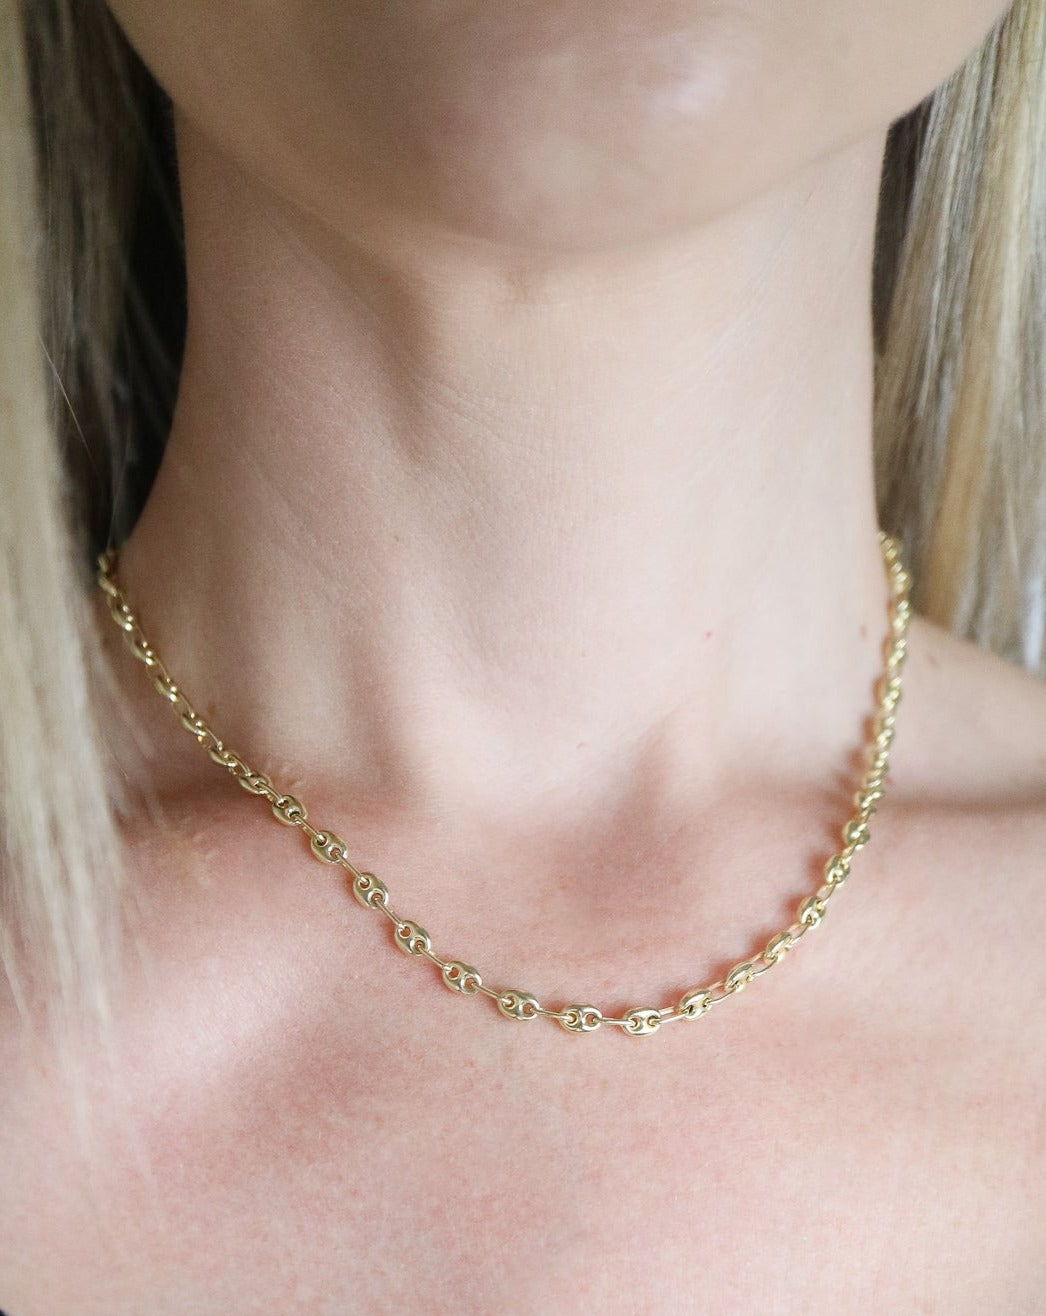 Gucci Chain in solid gold